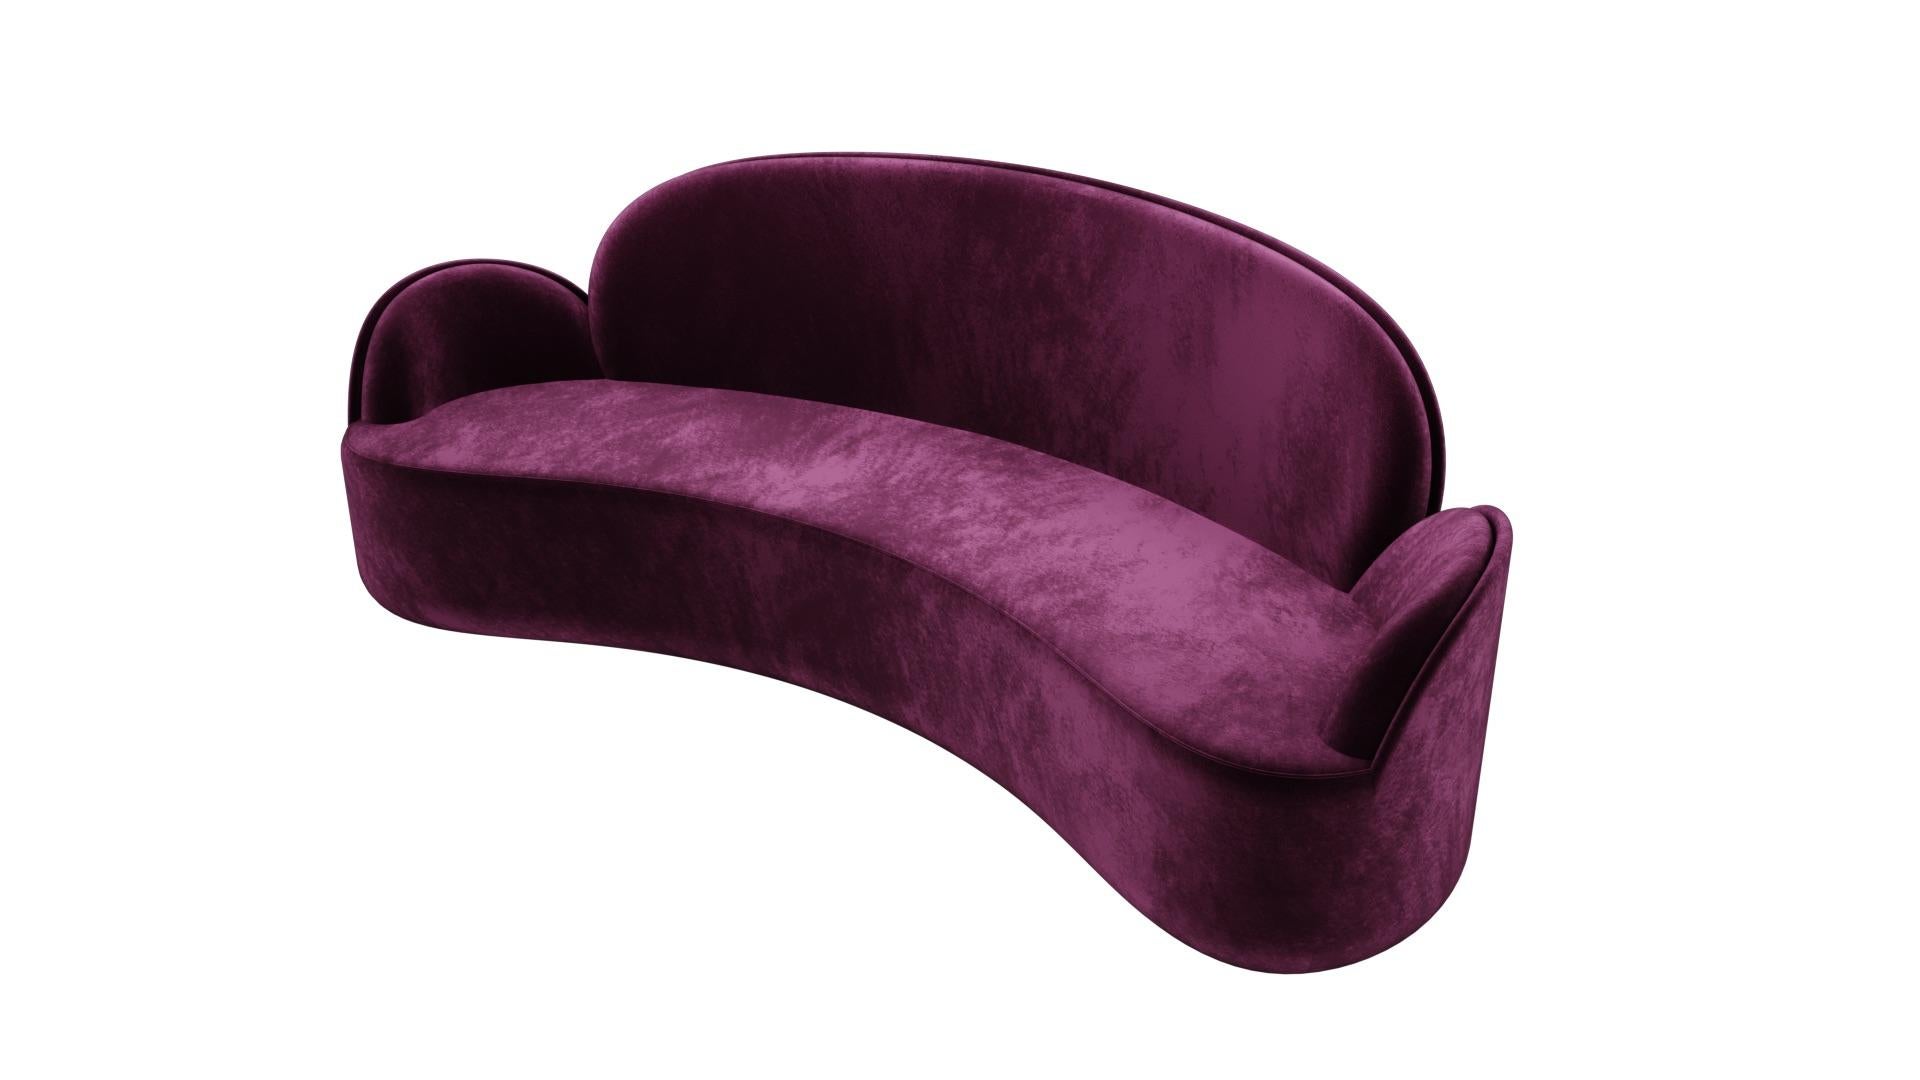 Strings 3-seat sofa with plush purple velvet by Nika Zupanc is an elegant and ergonomically perfect three-seat sofa, with gorgeous curves.

The word strings evokes a vision of lightness in our minds. Be it the strings of a musical instrument or